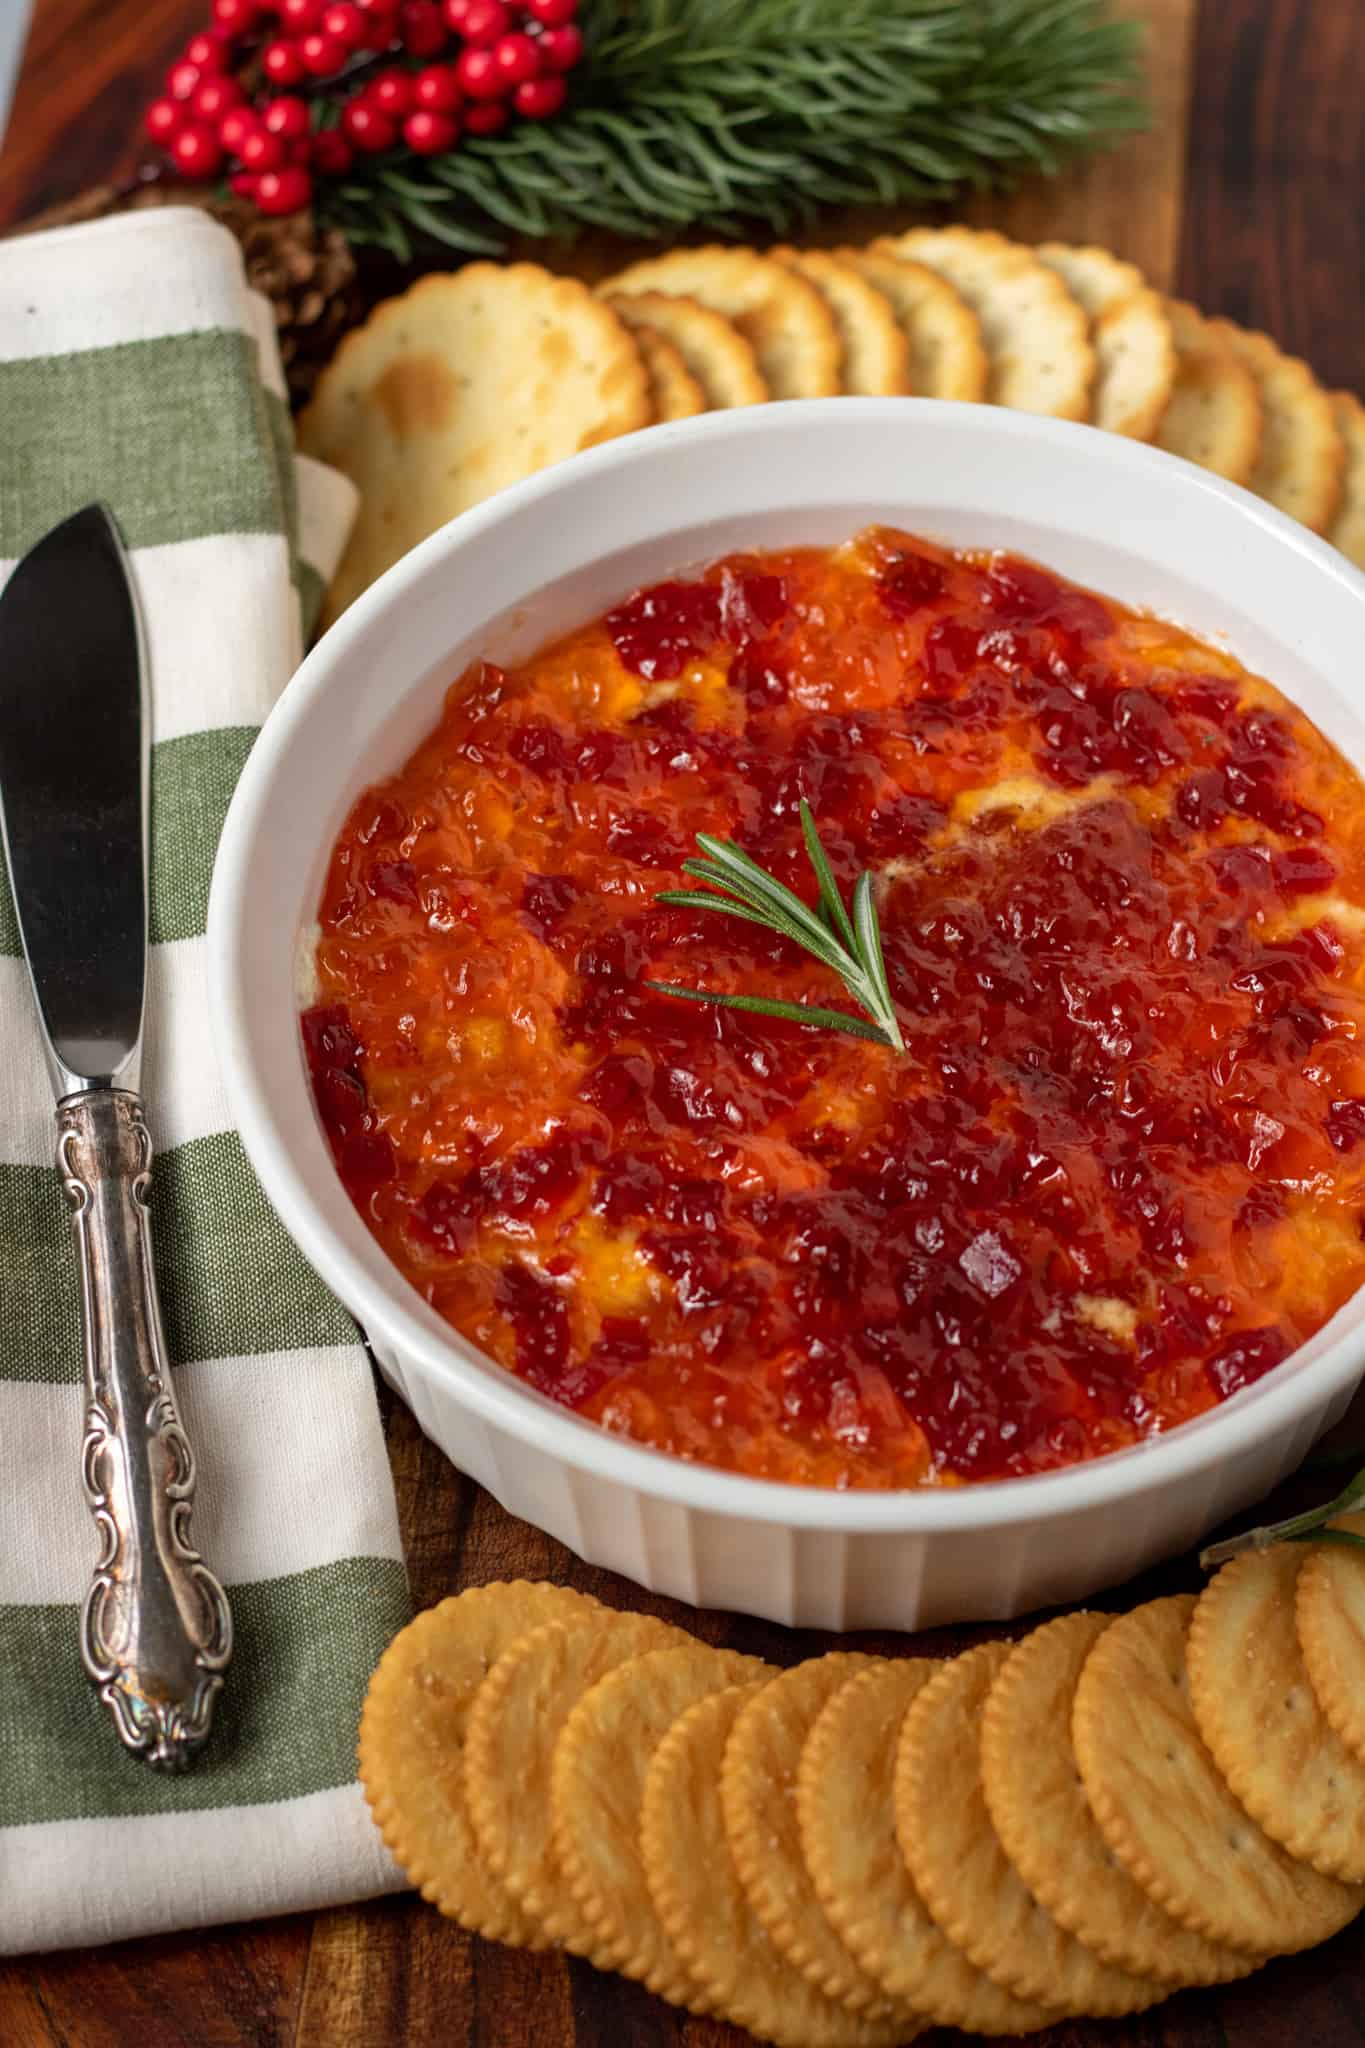 A round white serving dish filled with red pepper jelly dip. There's two kinds of assorted round crackers spread around it. There's a white and green striped kitchen towel next to the bowl with a knife spreader on top. There's a decorative pine berry tree branch in the background.